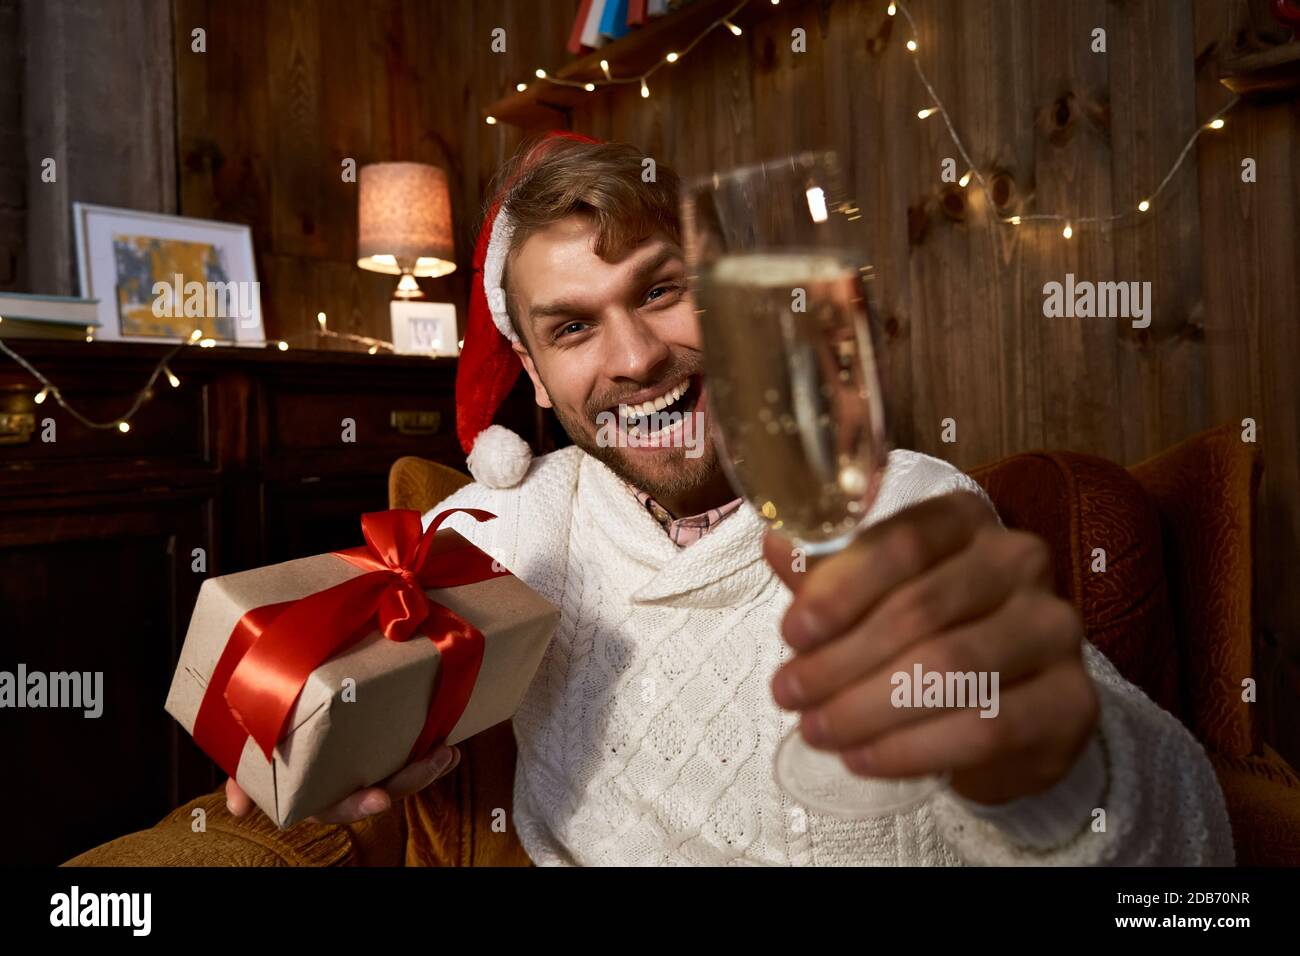 Happy guy wearing santa hat holding gift and champagne glass looking at web cam. Stock Photo